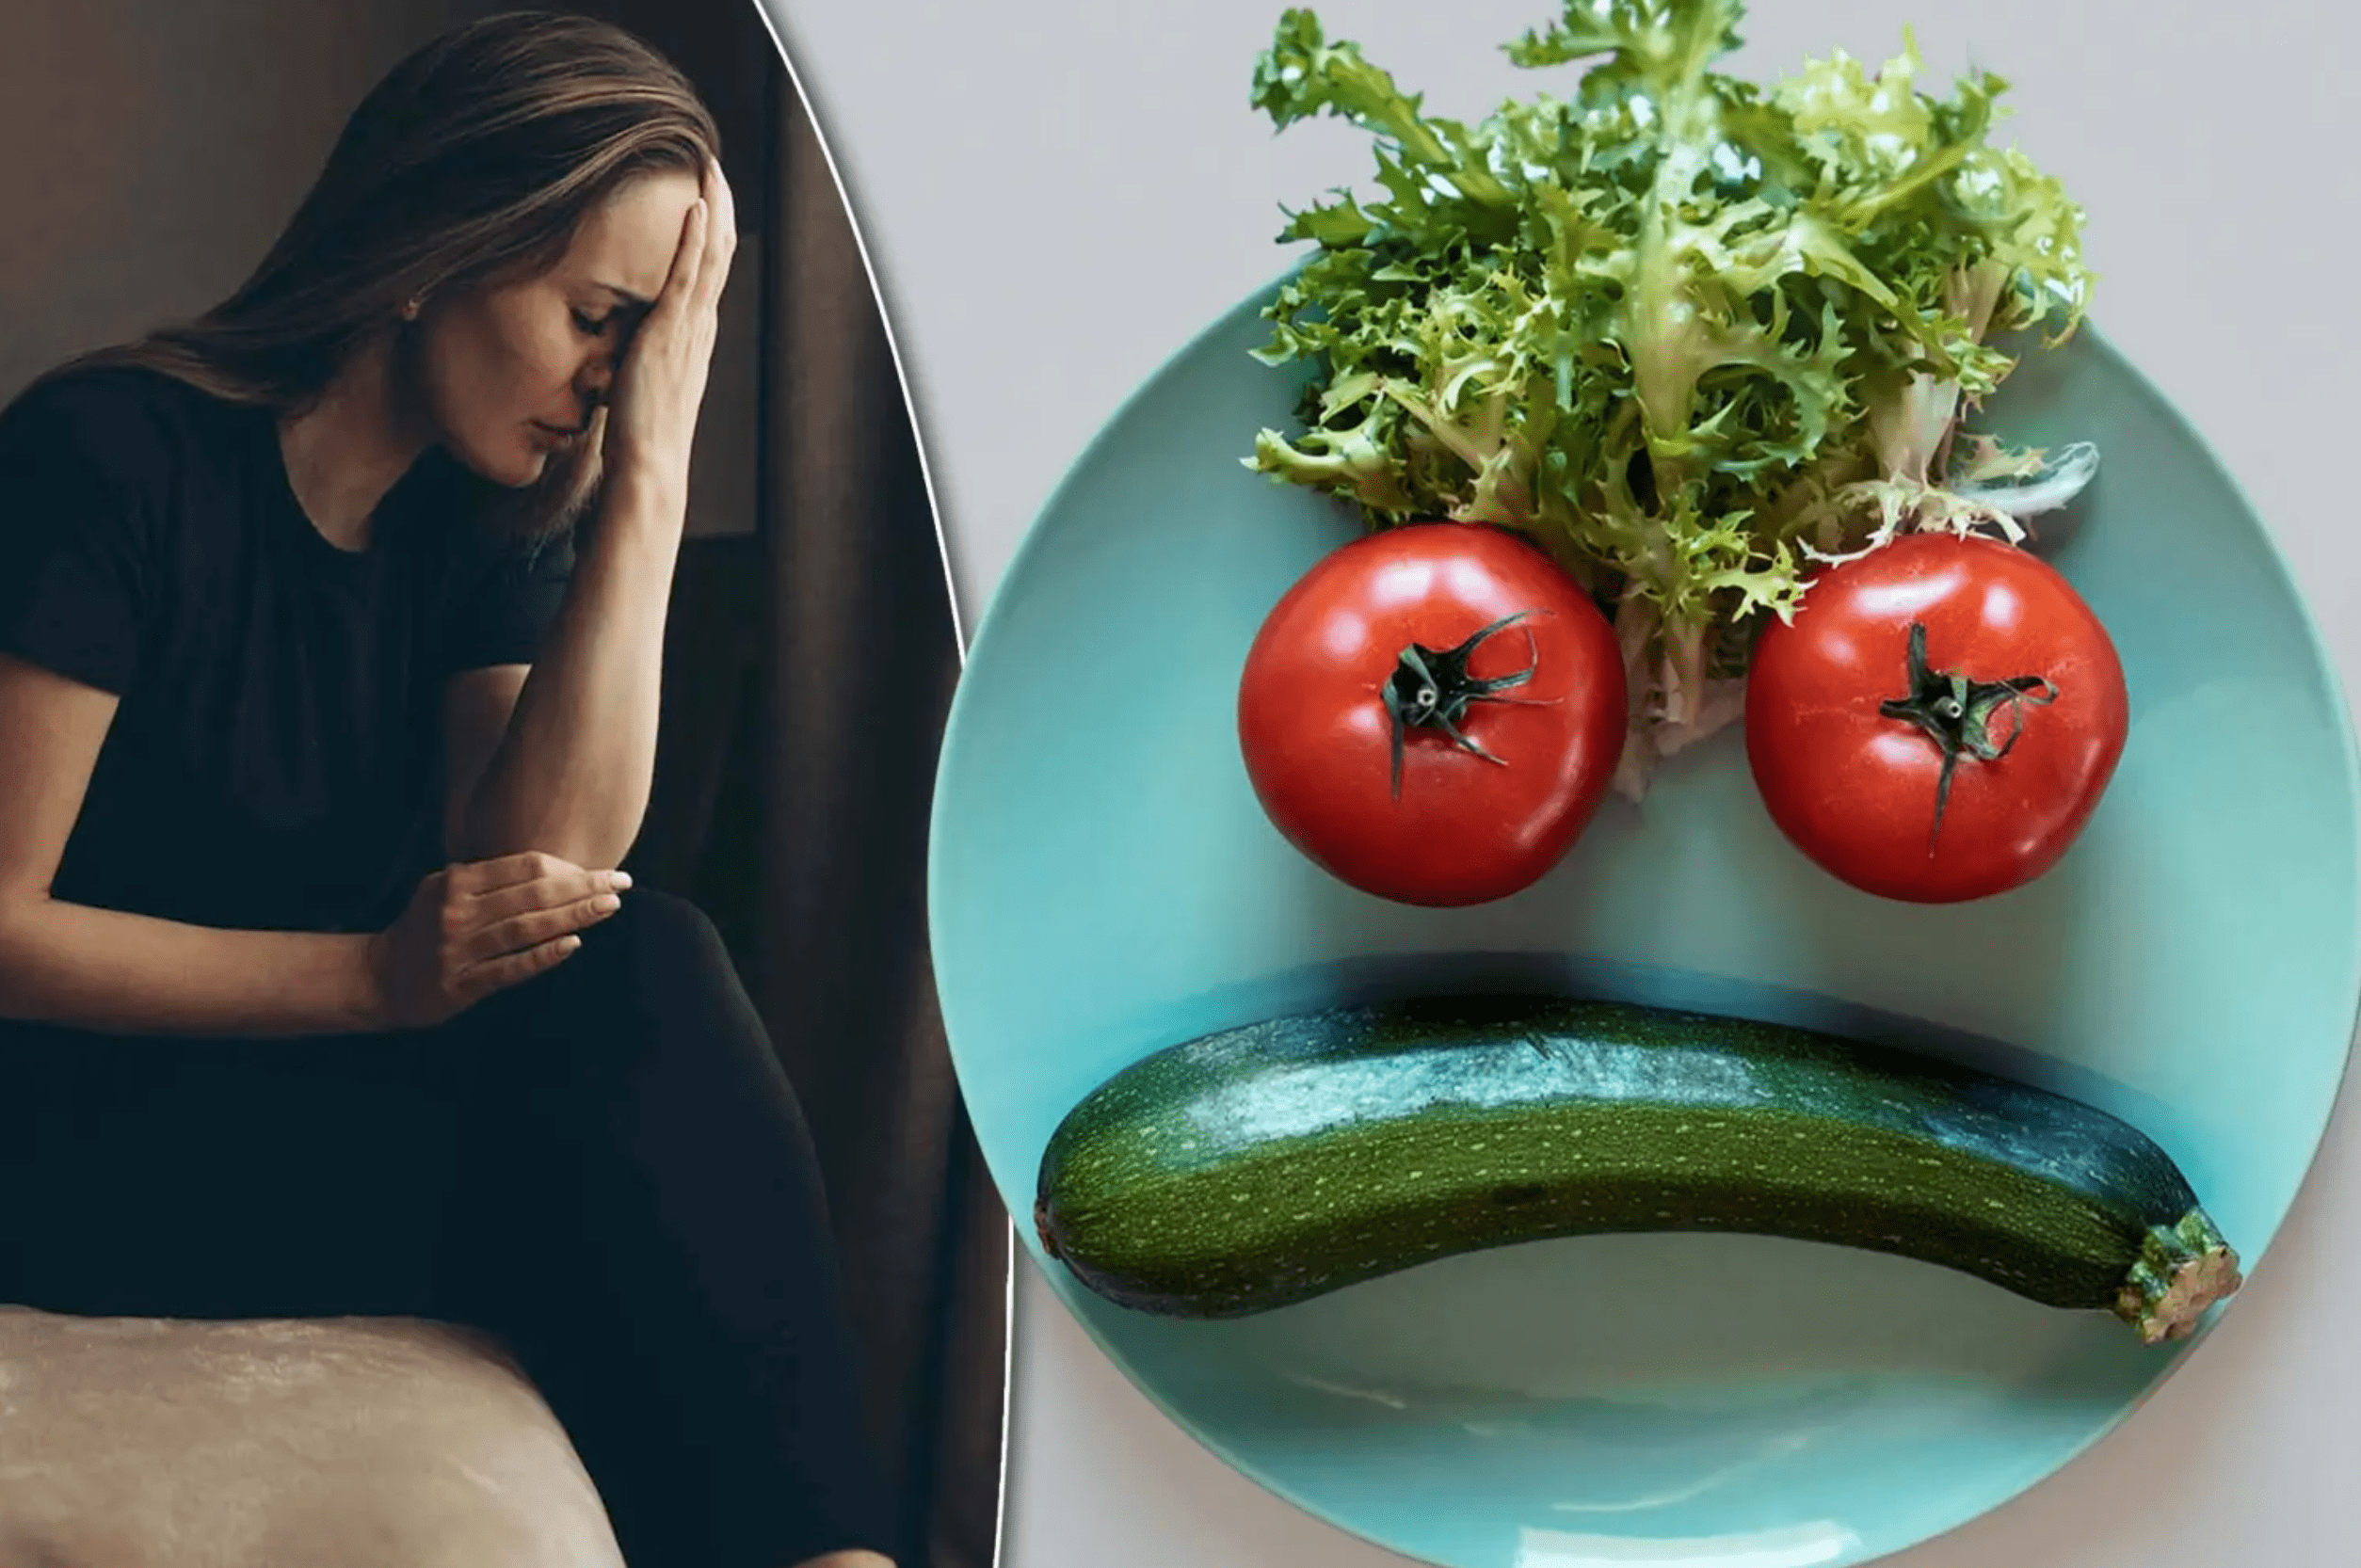 According to a new study, meatless diets are linked with depression.